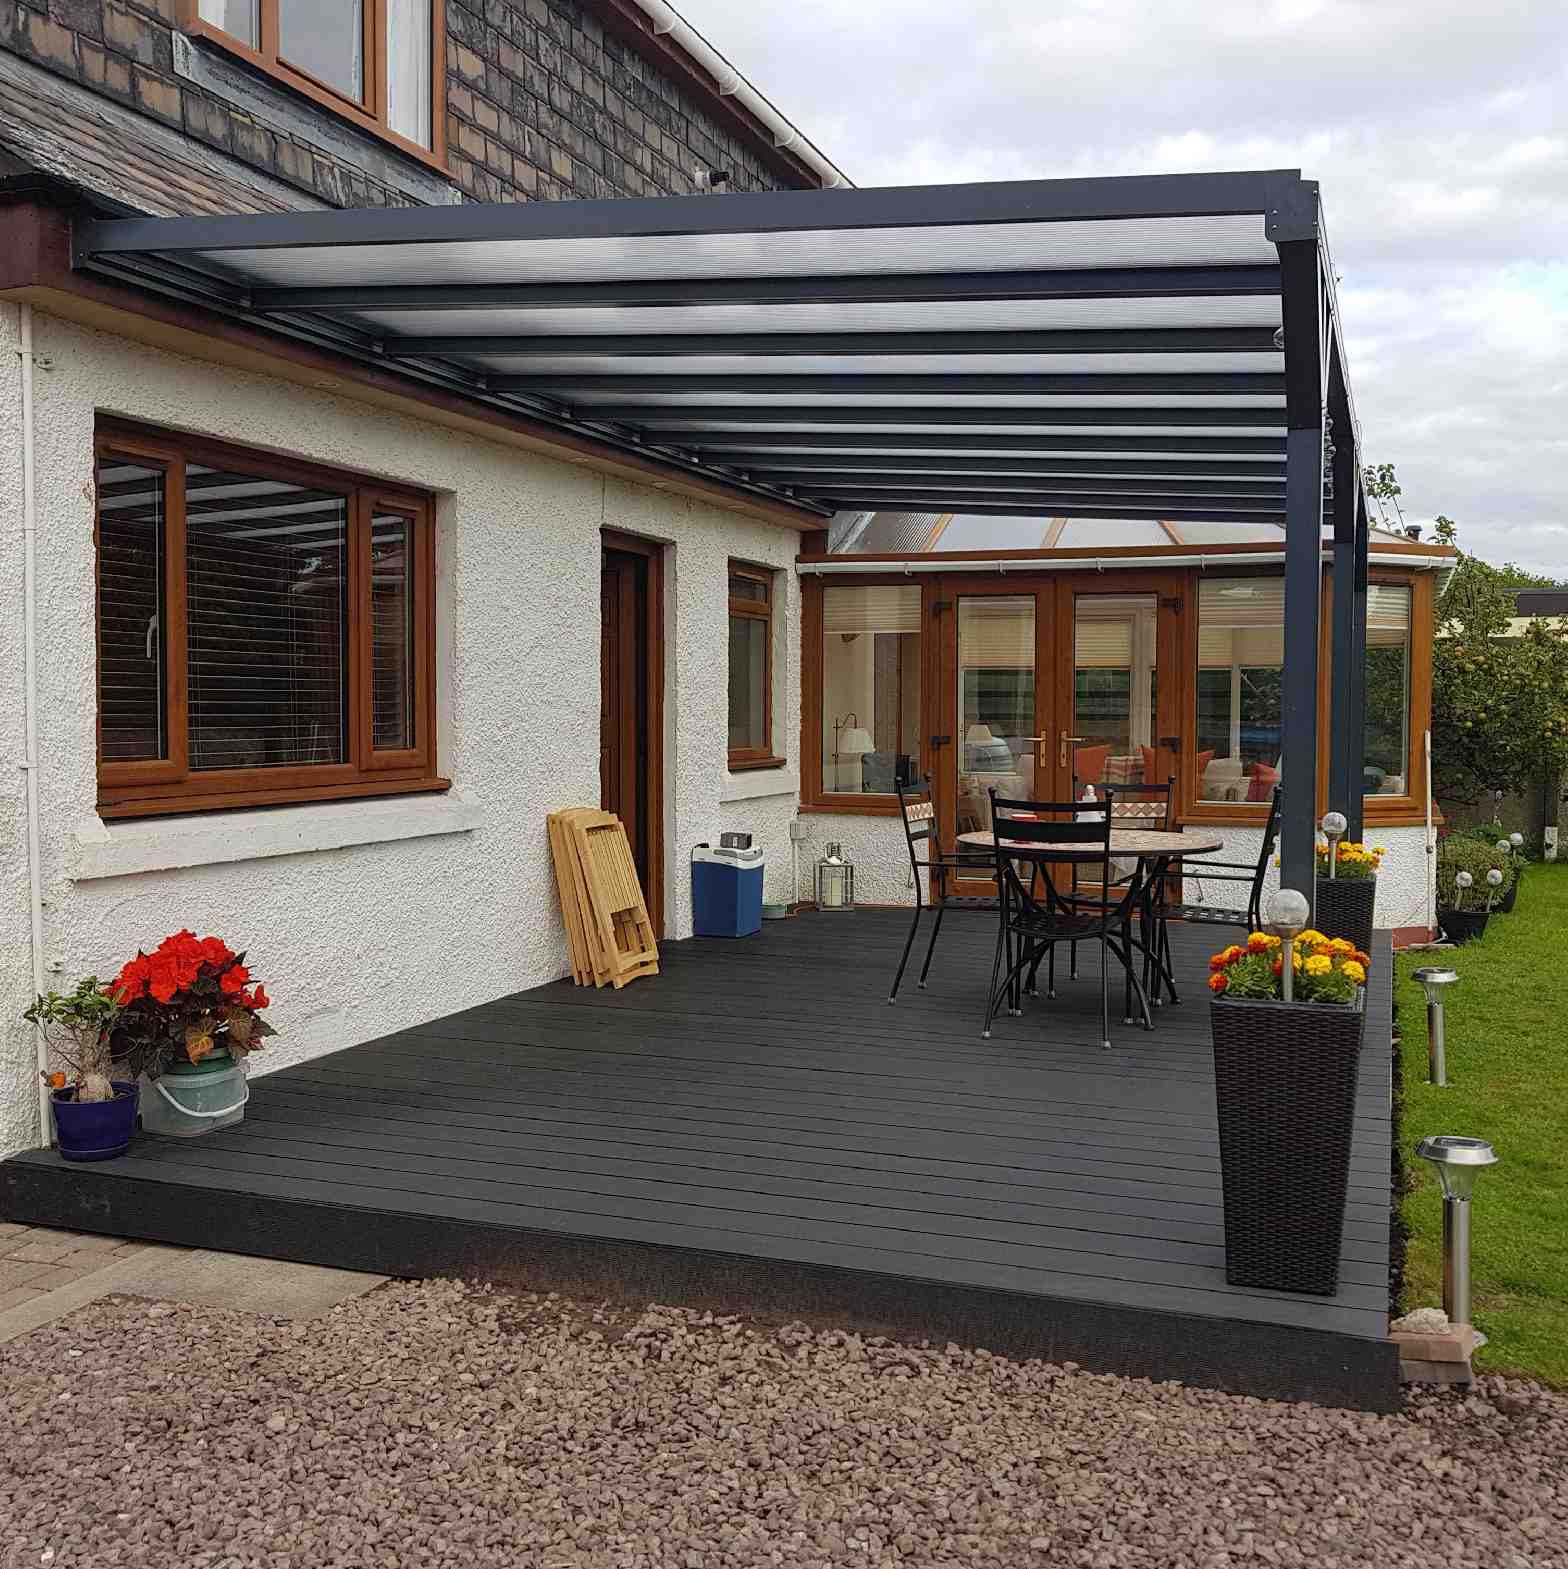 Buy Omega Verandah, Anthracite Grey, 16mm Polycarbonate Glazing - 4.9m (W) x 3.5m (P), (3) Supporting Posts online today